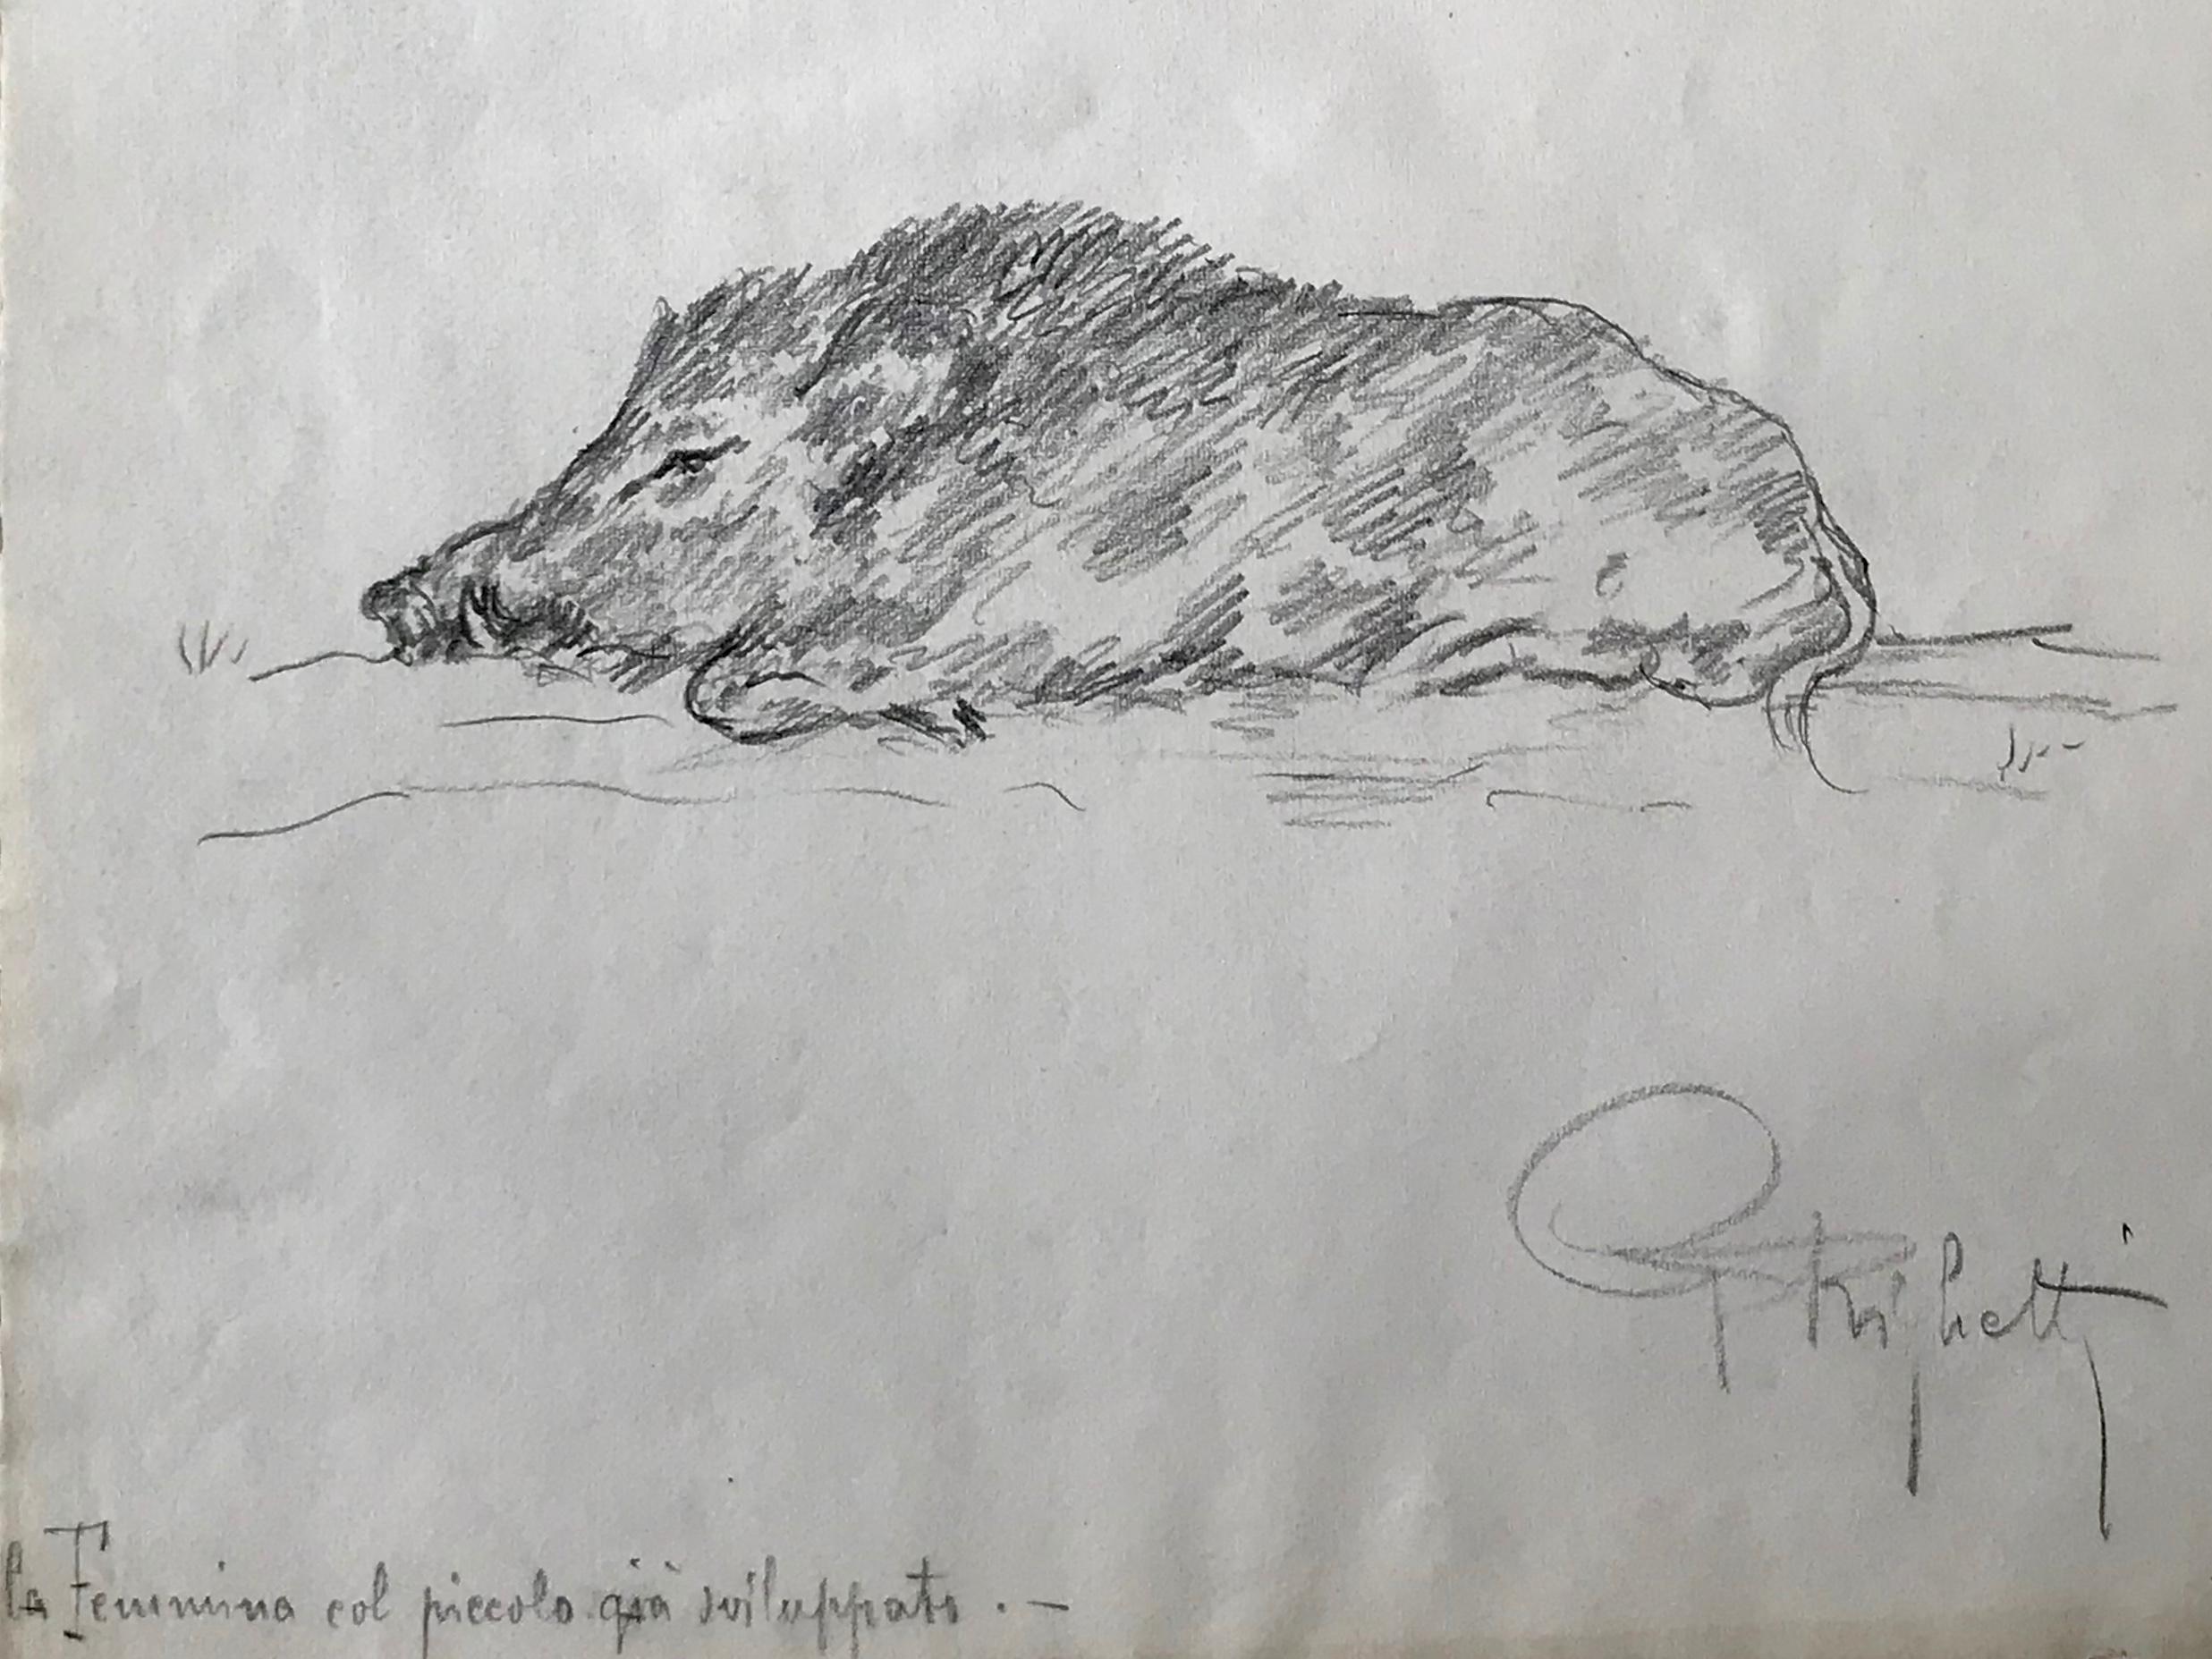 Boar drawing, Guido Righetti, 1919. Original vintage Italian pencil drawings/sketches of a boar in various poses from a series undertaken by Righetti for his sculptures in bronze including a boar, an elephant, a black cassoary, a white cassoary, an